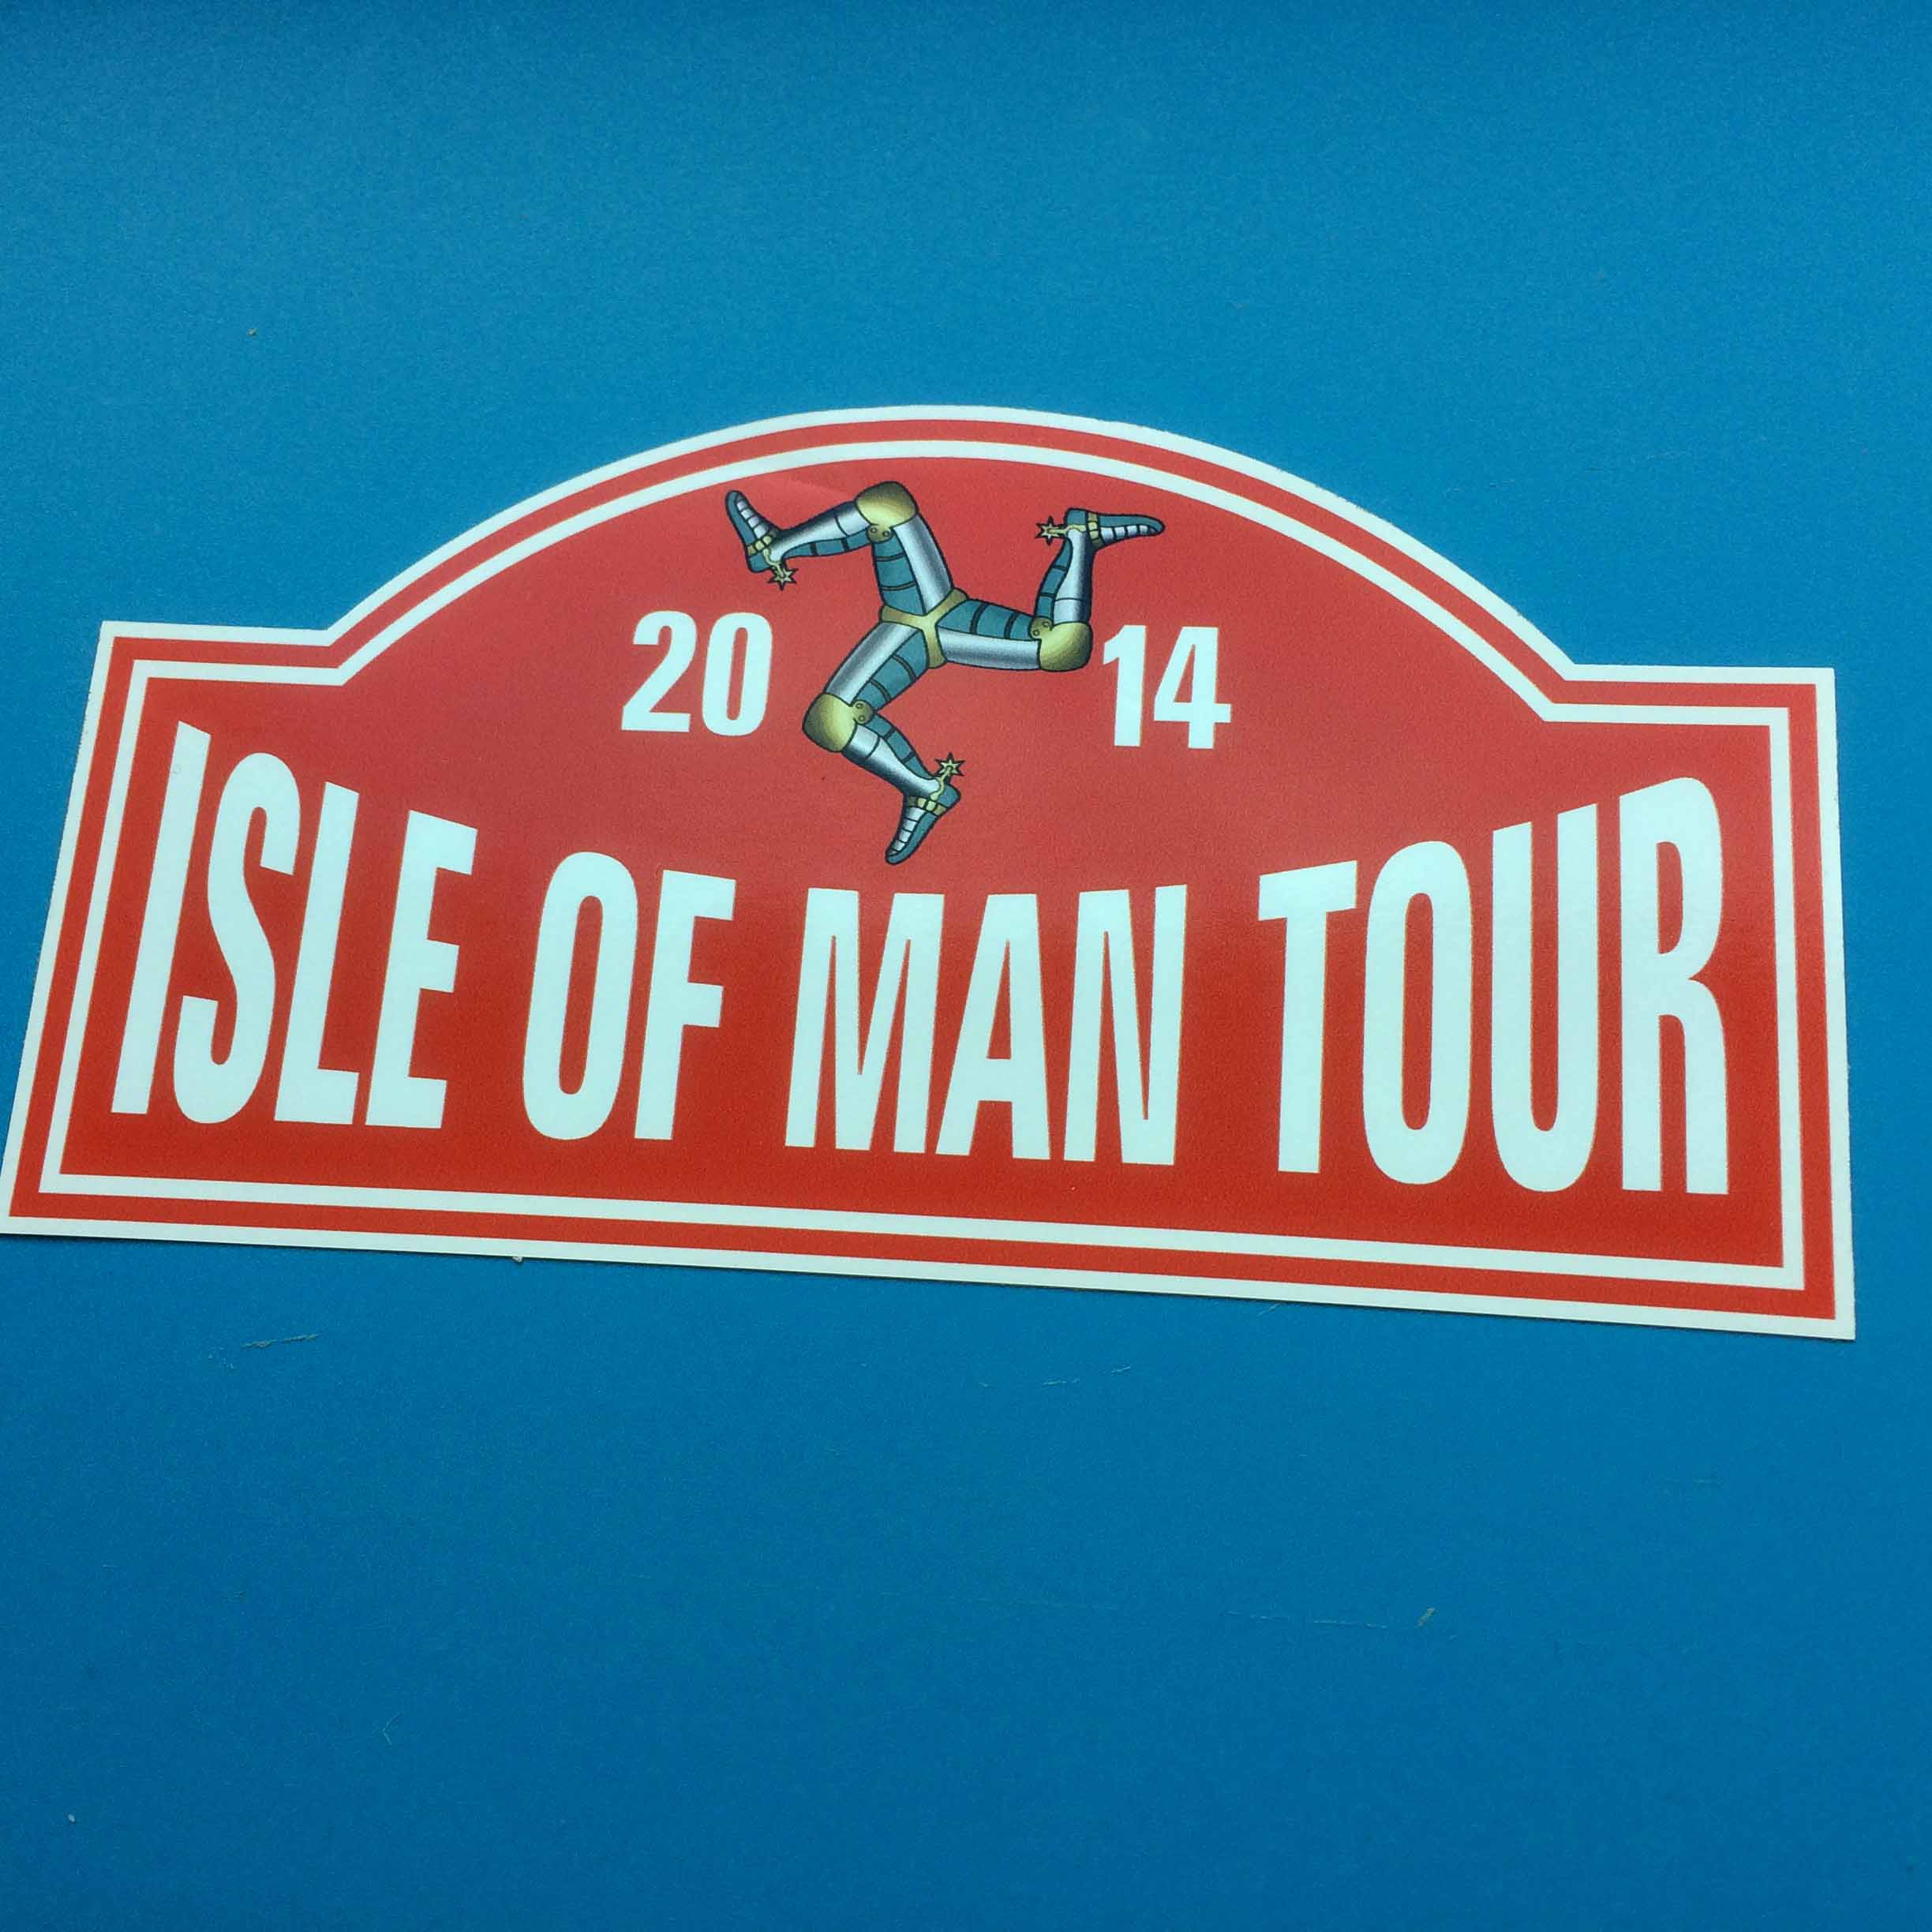 ISLE OF MAN TOUR ROAD RACES STICKER. Isle Of Man Tour 2014 in bold white lettering on a red background. Above is the Isle Of Man triskelion.